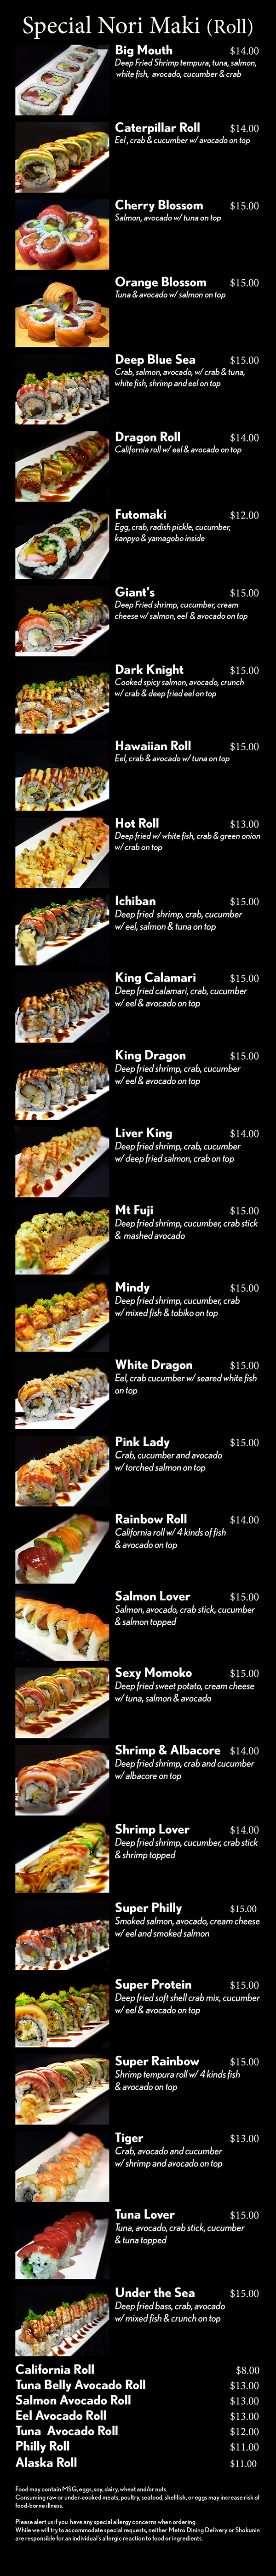 Nori Maki (Roll)



Salmon Roll					  $7
Tuna Roll					  $7
Negi Toro Roll   Bluefin tuna belly	  $9
Negi Hamachi Roll			  $7
California Roll				  $7
Salmon Avocado Roll		  $8
Avocado Roll				  $8
Philly Roll					  $8
Alaska Roll					  $8
Eel Avocado Roll				  $8
Shrimp Tempura Roll		  $8
Spider Roll   Deep fried softshell crab	  $8
Futomaki   Egg, crab stick and veggie	  $8
Salmon Skin Roll			  $8
Special Nori Maki (Roll)
Caterpillar Roll				$12
Rainbow Roll				$12
Dragon Roll					$12
Tuna Lover					$12
Tuna, avocado, crab stick, cucumber & tuna topped
Salmon Lover				$12
Salmon, avocado, crab stick, cucumber & salmon topped
Shrimp Lover				$12
Deep fried shrimp, cucumber, crab stick 
& shrimp topped
Tuna Poke Roll				$12
Tuna, cucumber, crab stick w/ spicy tuna poke
Salmon Poke Roll			$12
Salmon, cucumber, crab stick w/ spicy salmon poke
Mt Fuji						$13
Deep fried shrimp, cucumber, crab stick and mashed avocado on top
Bay Scallop Tempura		$12
Crab, avocado, and cucumber 
w/ deep fried scallop on top
Big Mouth					$14
Shrimp tempura, tuna, salmon, white fish, 
avocado, cucumber and crab
Tiger						$12
Crab, avocado and cucumber 
w/ shrimp and avocado on top
Shrimp & Albacore			$12
Deep fried shrimp, crab and cucumber 
w/ albacore on top
Pink Lady					$13
Crab, cucumber and avocado 
w/ torched salmon on top
Veggie Rolls
Cucumber Roll				  $5
Avocado Roll				  $5
Shitake Mushroom Roll		  $5
AAC Roll				  	  $7
Avocado, asparagus, cucumber 
Sweet Potato Roll			  $6
Gyuri Special Roll		  	$10
Cucumber wrap 
Sweet Tofu Skin   Inari		  	  $5


Food may contain MSG, eggs, soy, dairy, wheat and/or nuts.
Consuming raw or under-cooked meats, poultry, seafood, shellfish, or eggs may increase risk of food-borne illness.

Please alert us if you  have any special allergy concerns when ordering.
While we will try to accommodate special requests, neither Metro Dining Delivery or Shokunin are responsible for an individual’s allergic reaction to food or ingredients.